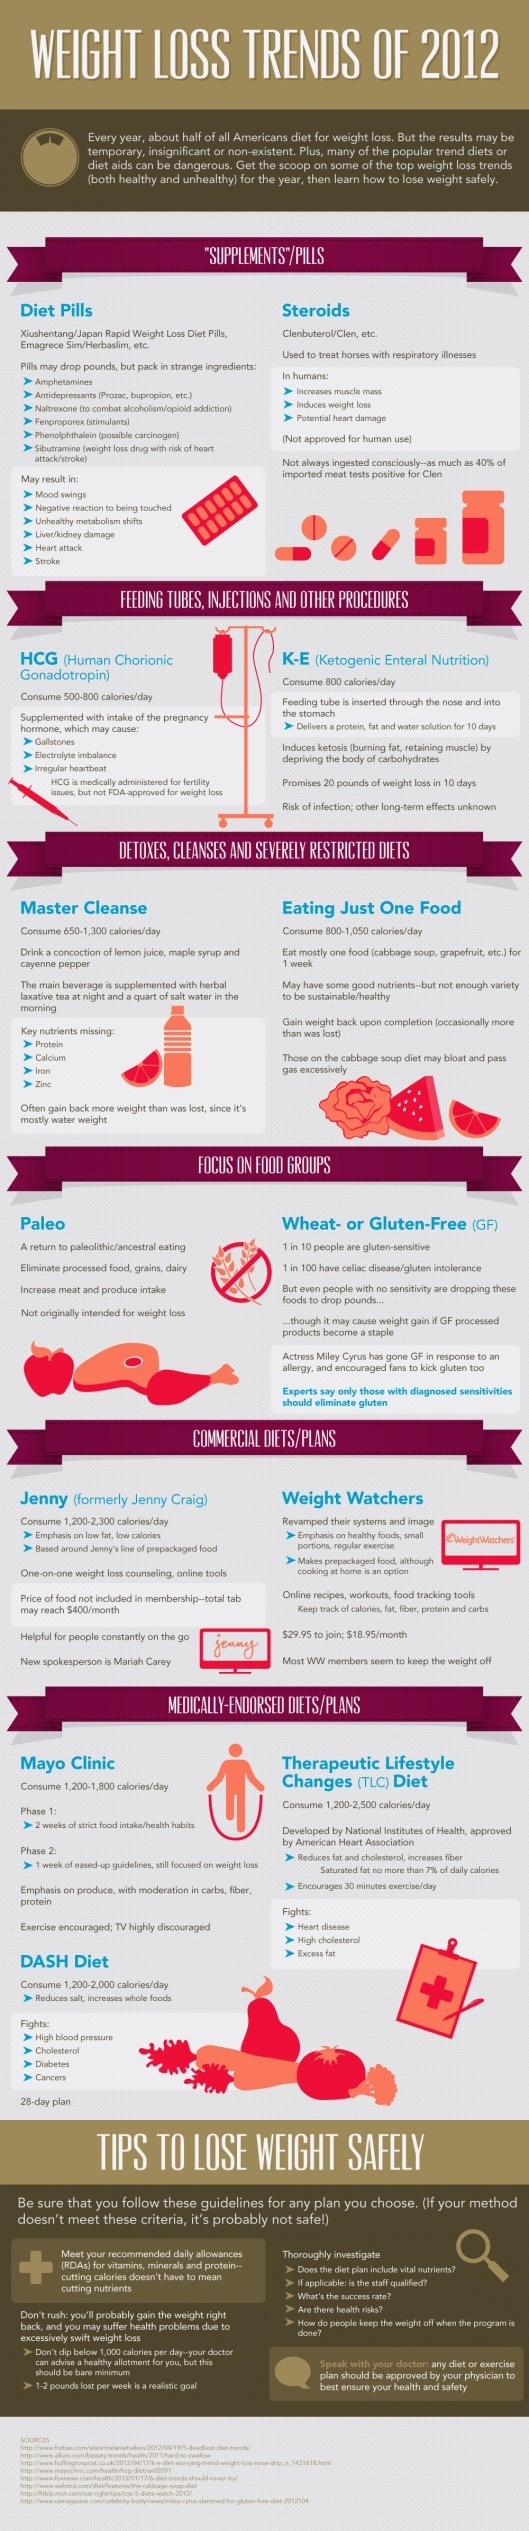 Weight Loss Trends of 2012 HRF